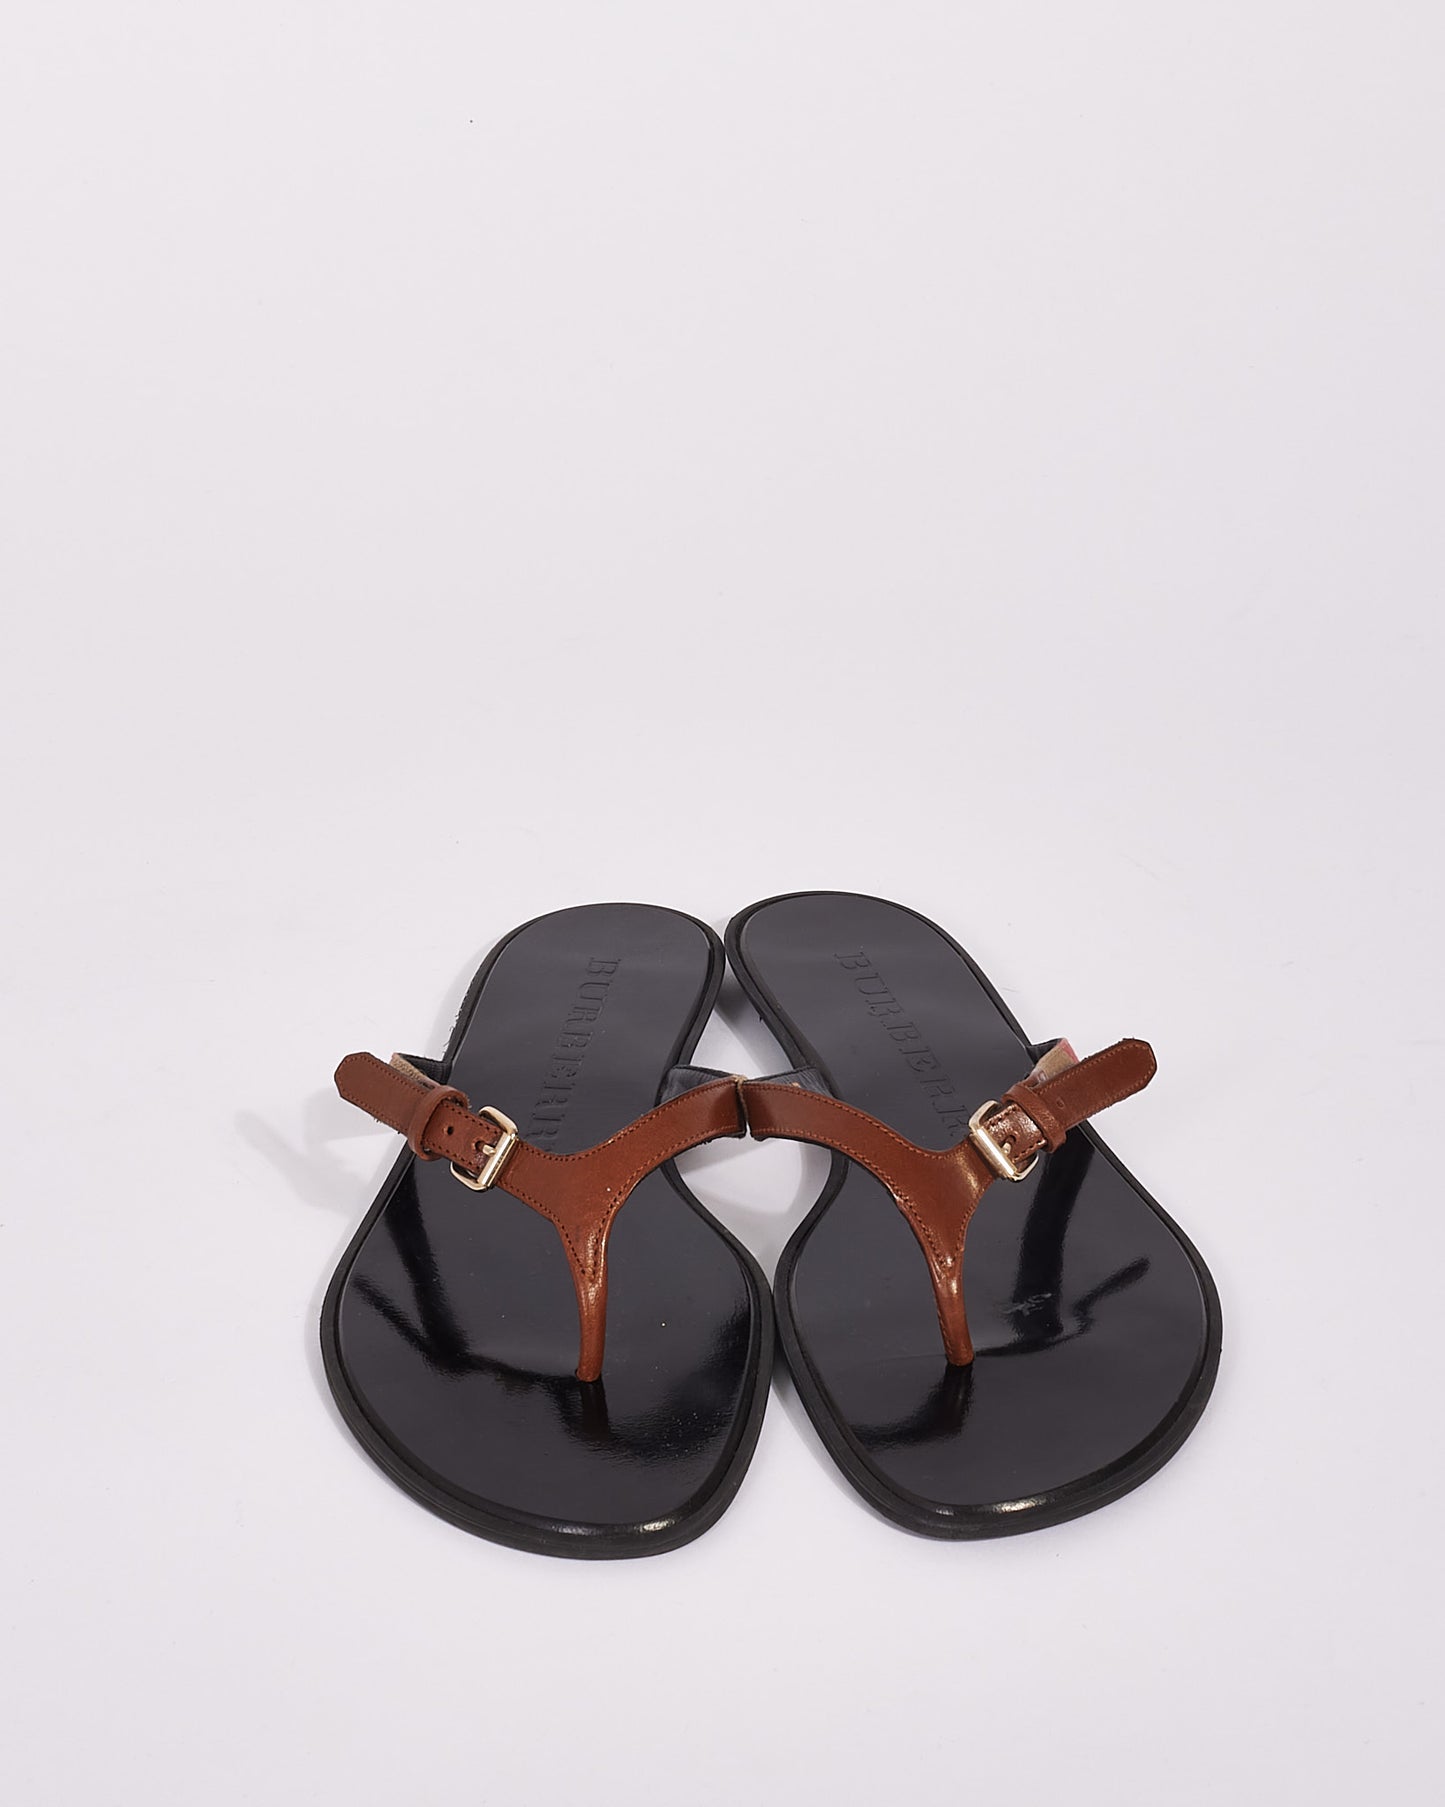 Burberry Brown Check Print Leather Flip Flop Sandals - 39